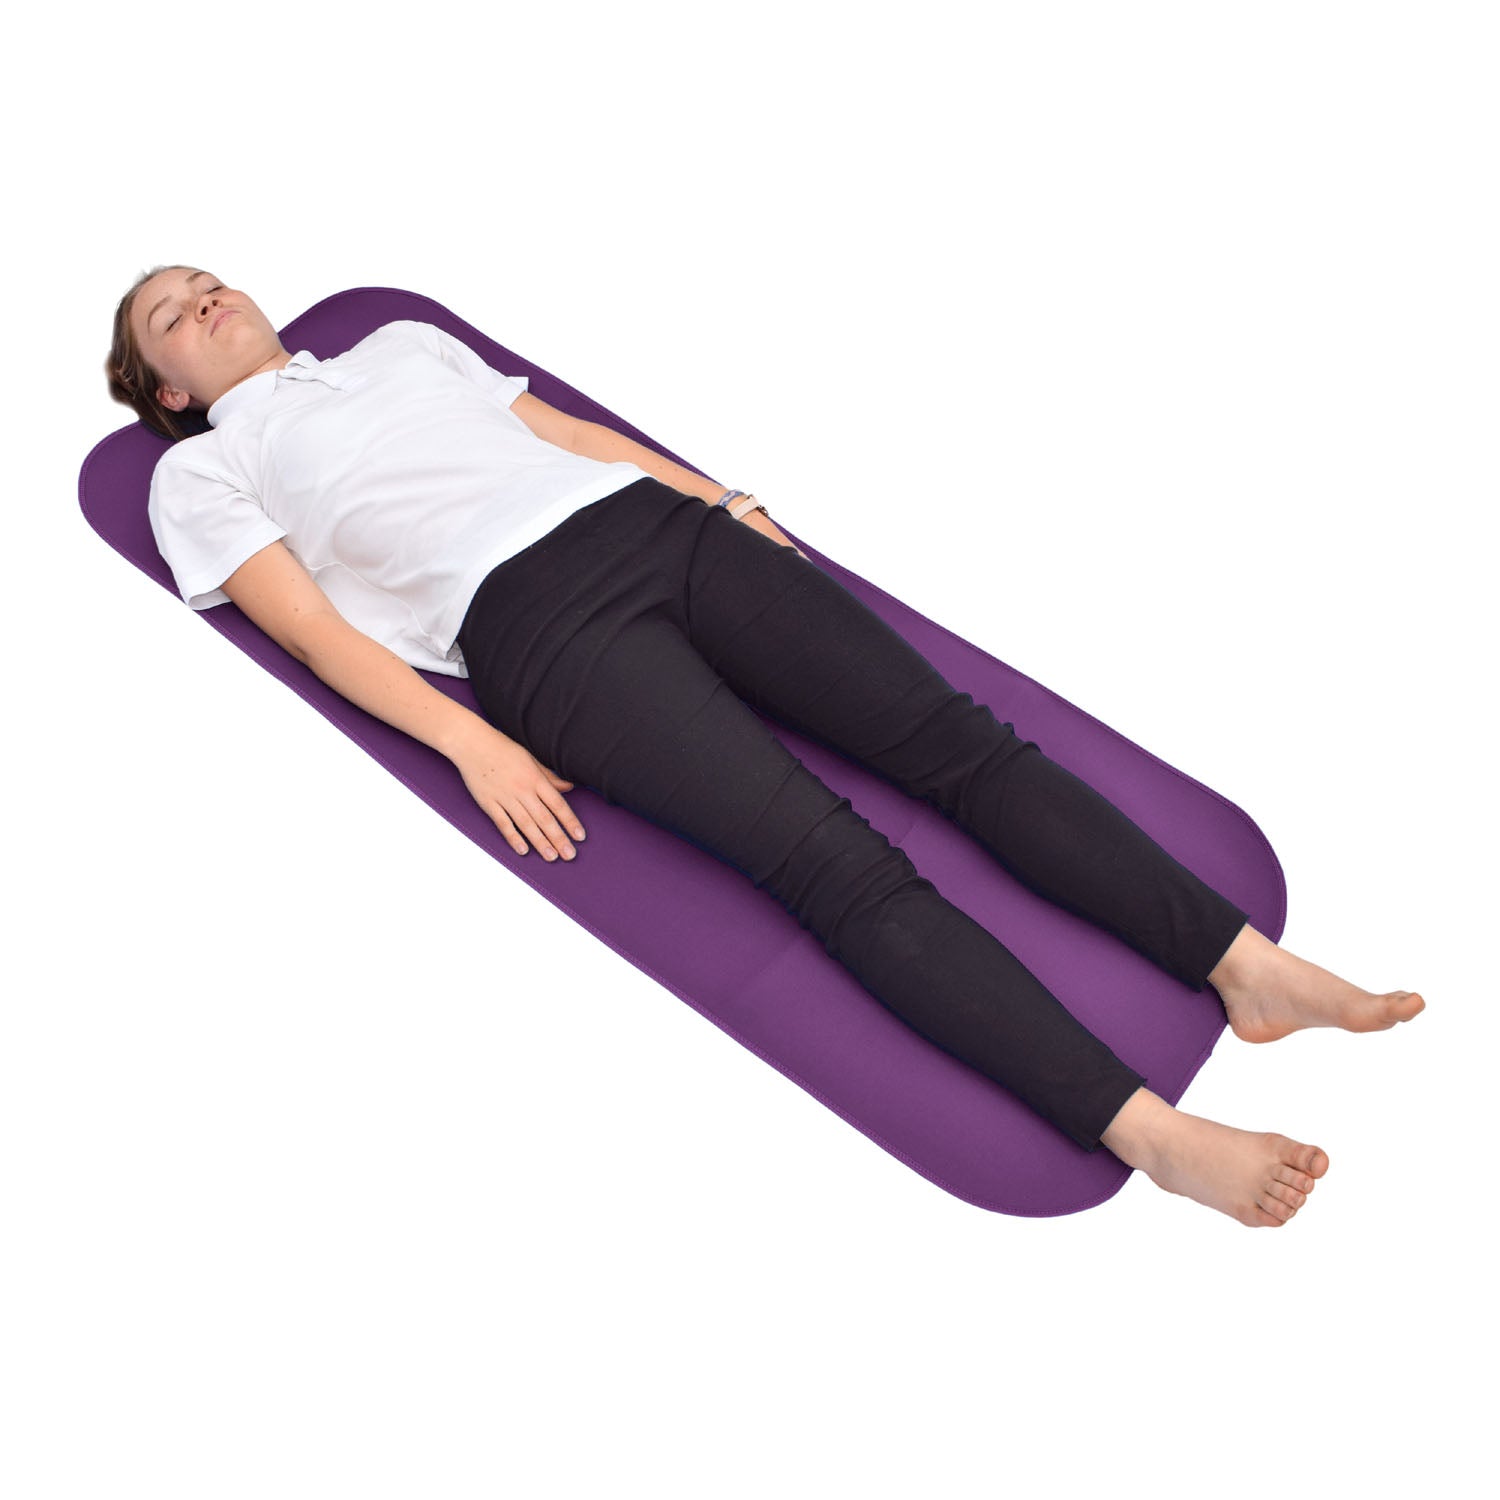 Adult and Teenager Changing Mat - Aubergine/Black (UK TAX Exempt) | Incontinence Aids | Care Designs